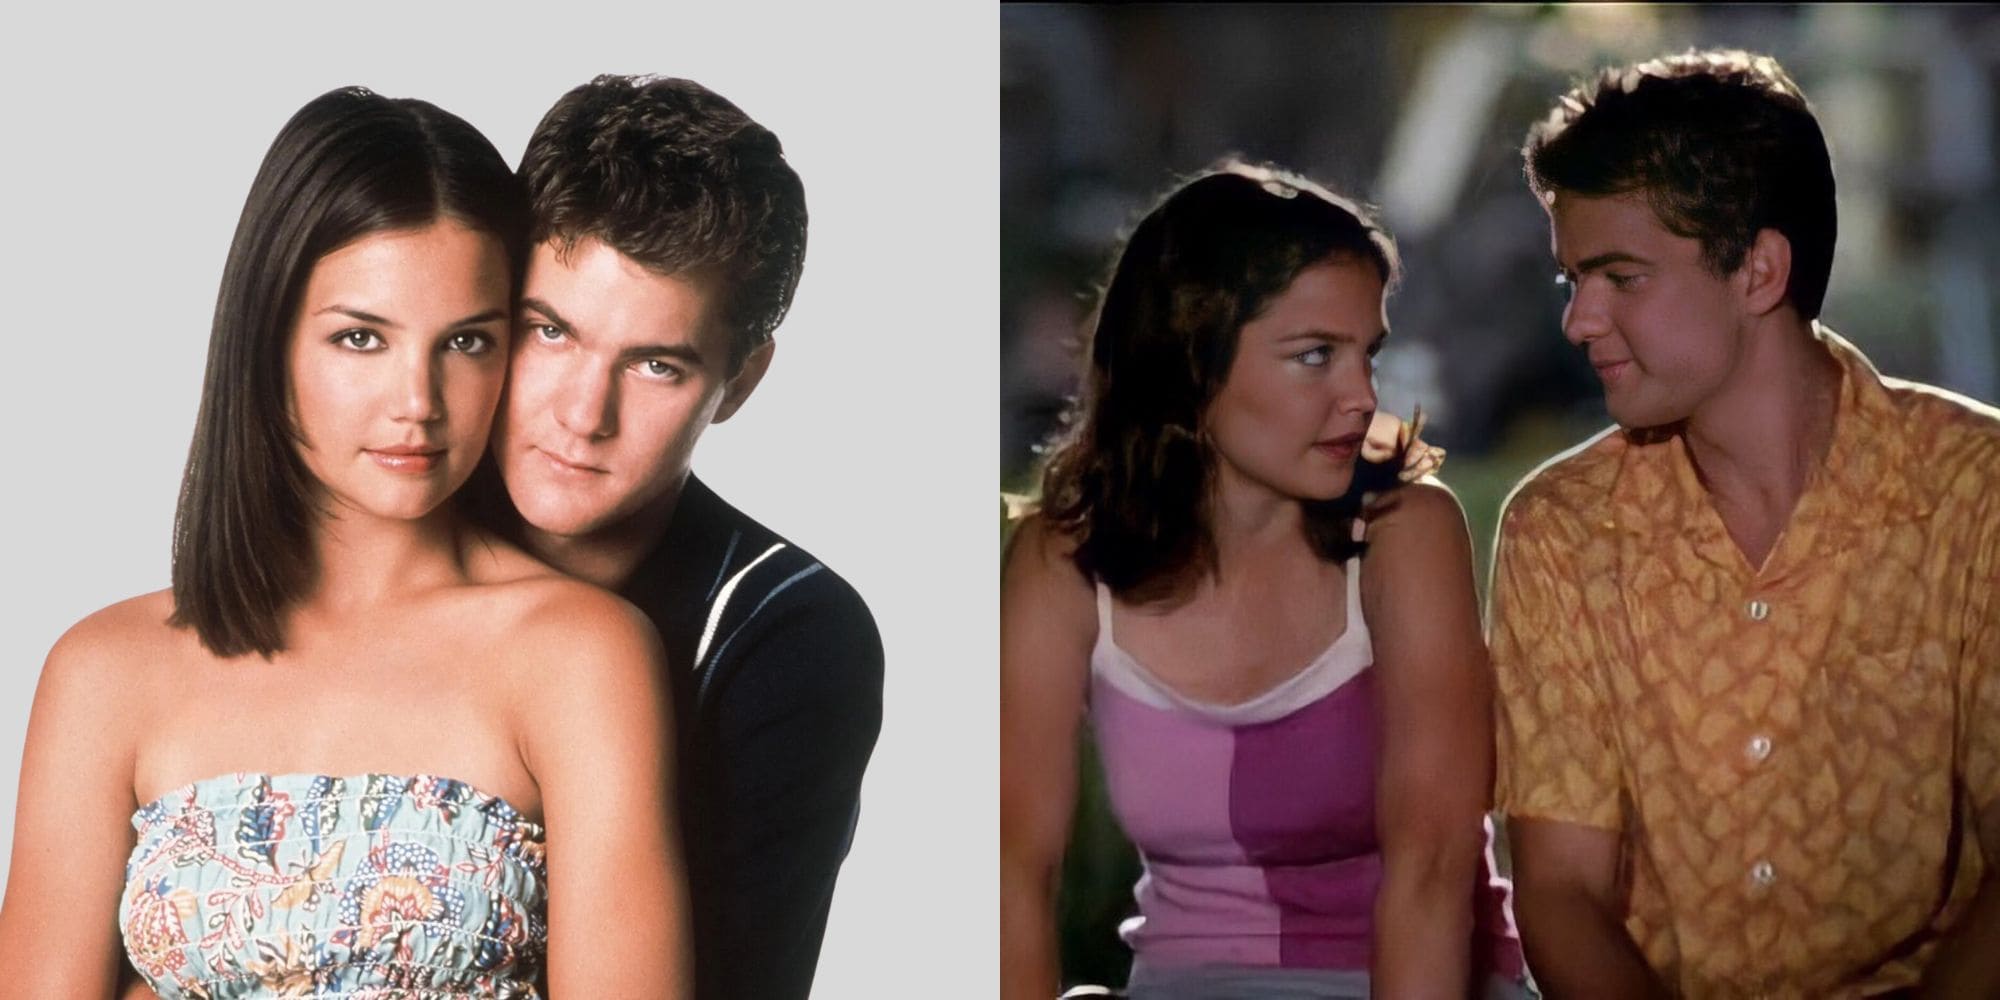 Did Pacey and Joey Break Up?